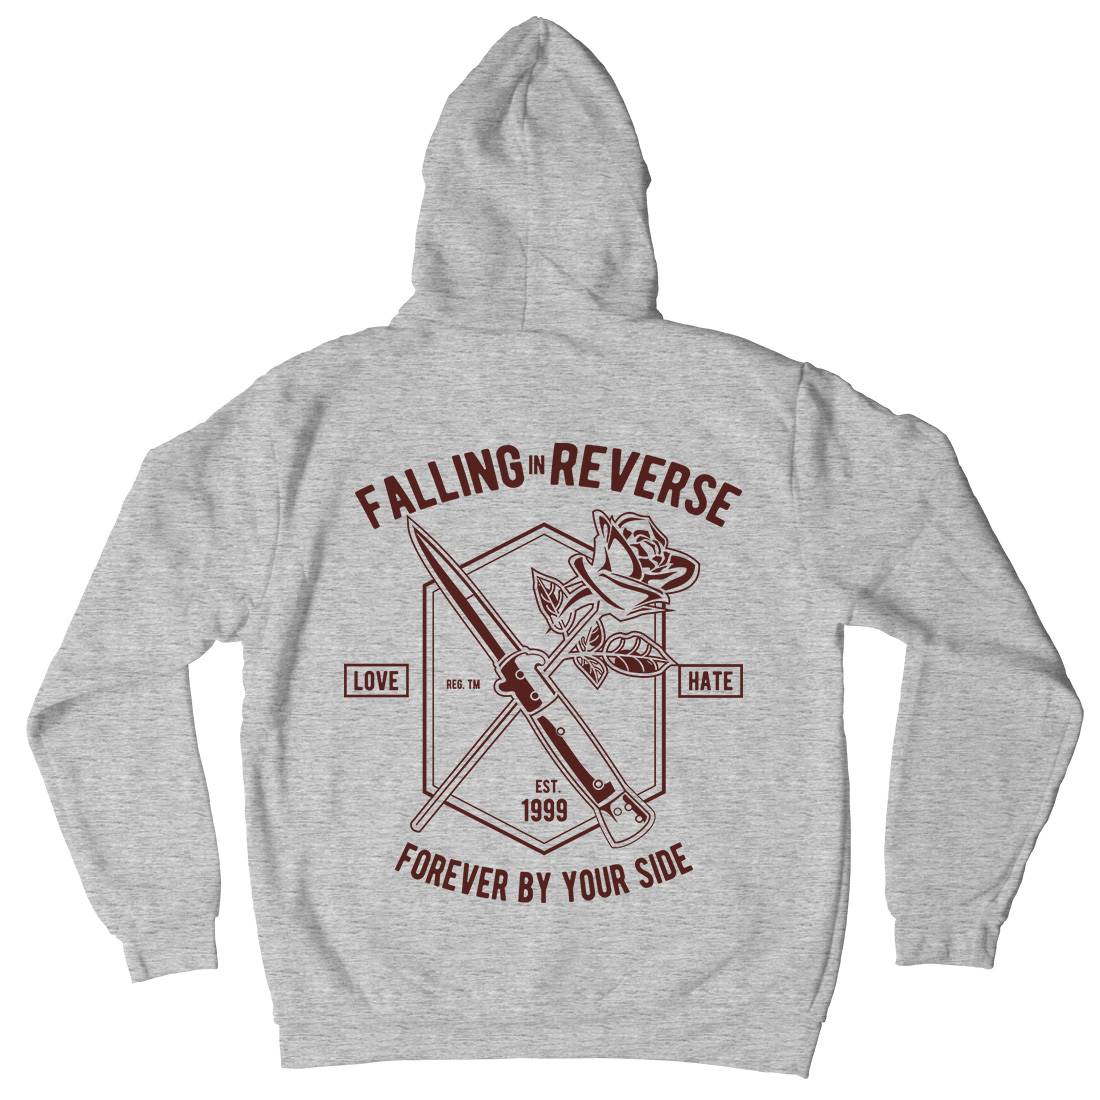 Falling In Reverse Mens Hoodie With Pocket Warriors A050